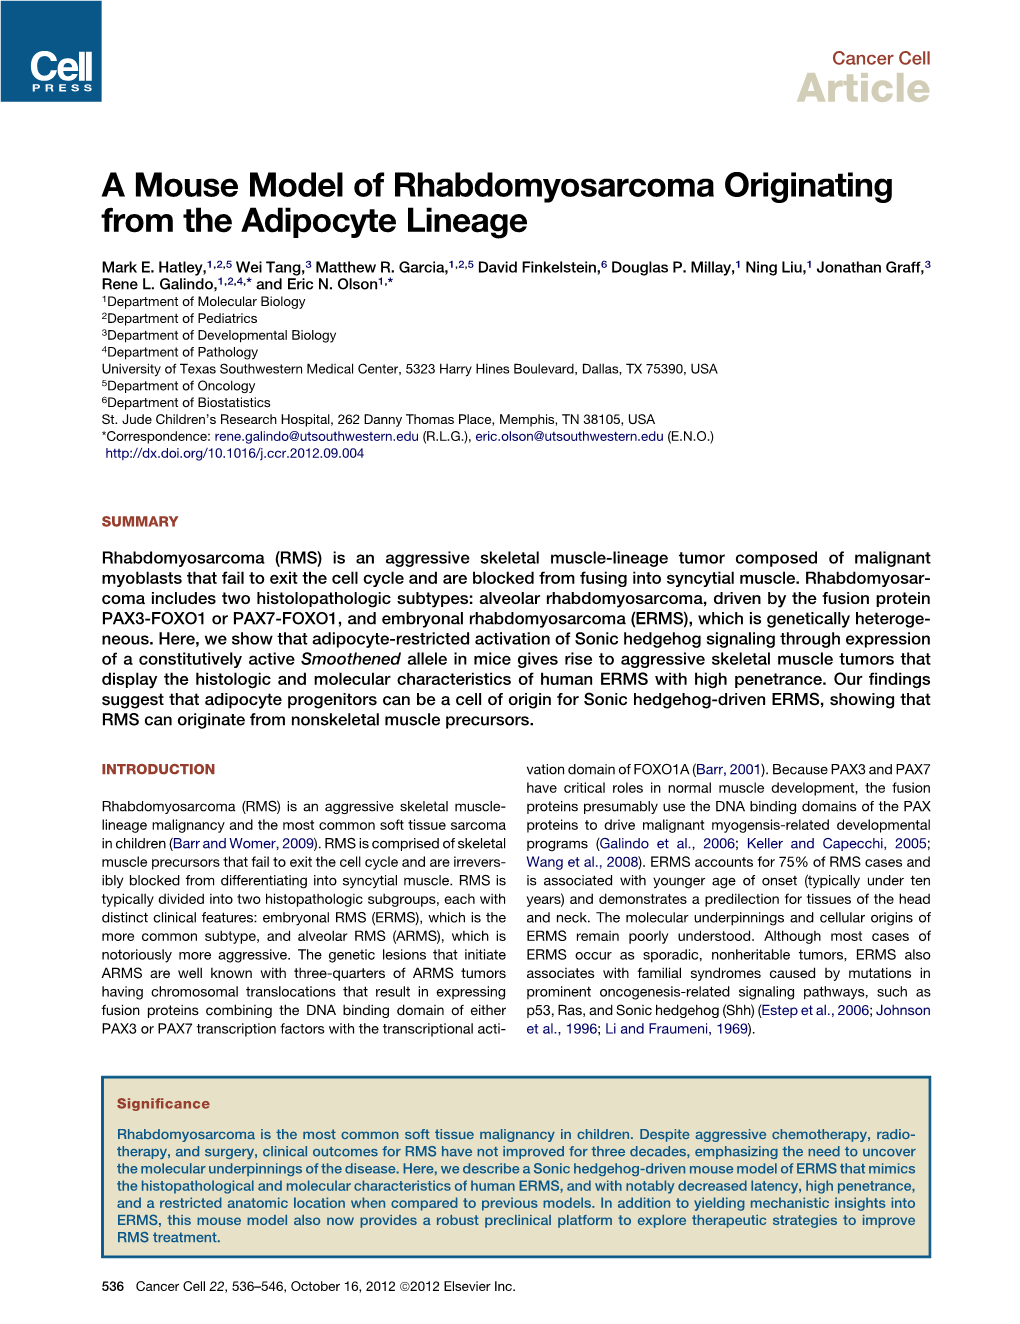 A Mouse Model of Rhabdomyosarcoma Originating from the Adipocyte Lineage